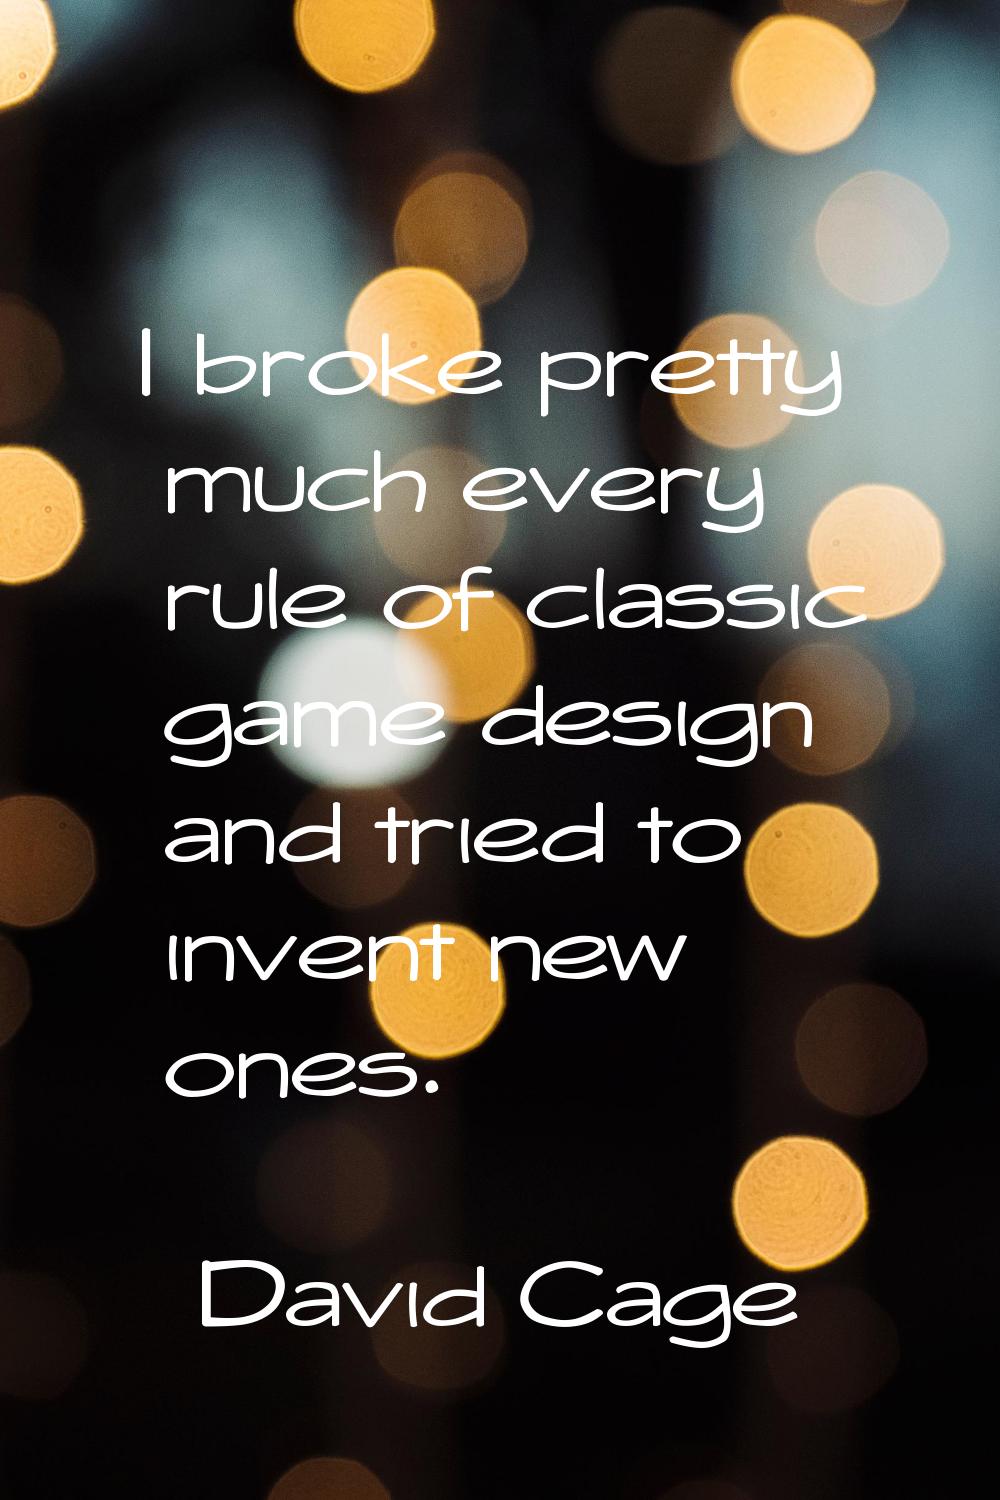 I broke pretty much every rule of classic game design and tried to invent new ones.